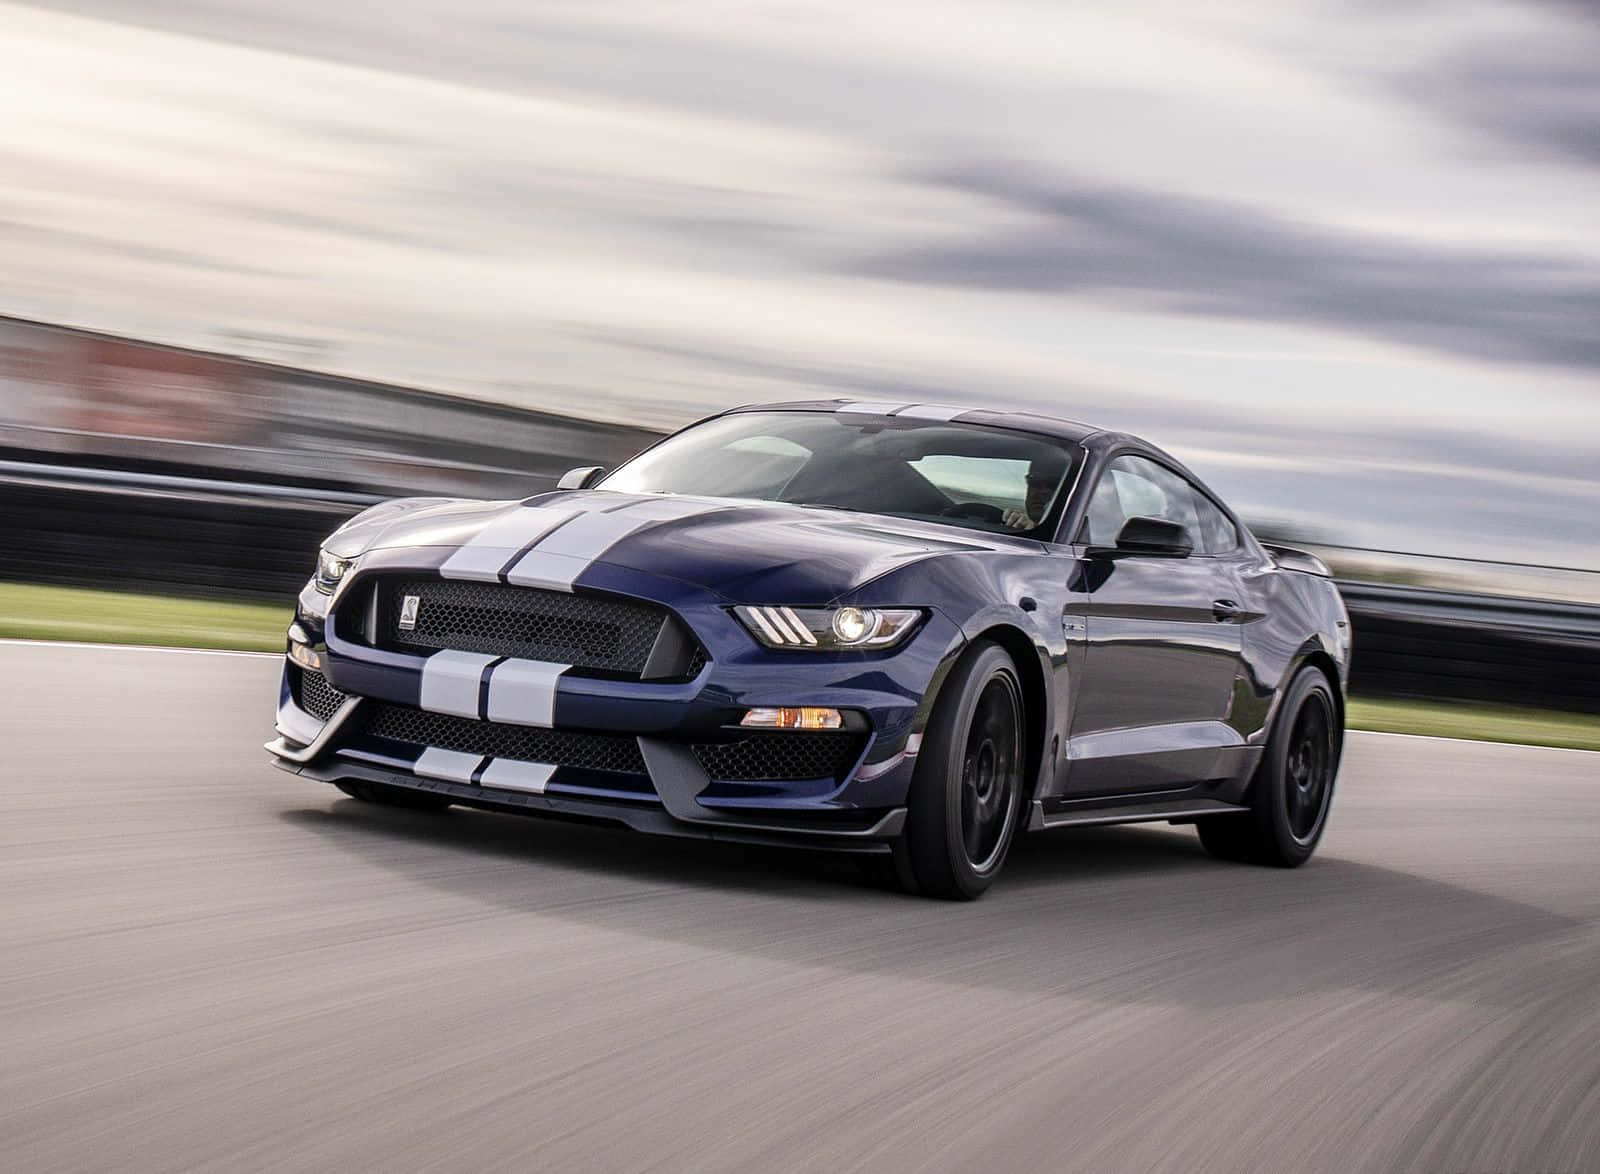 Powerful Ford Mustang Shelby GT350 in action Wallpaper